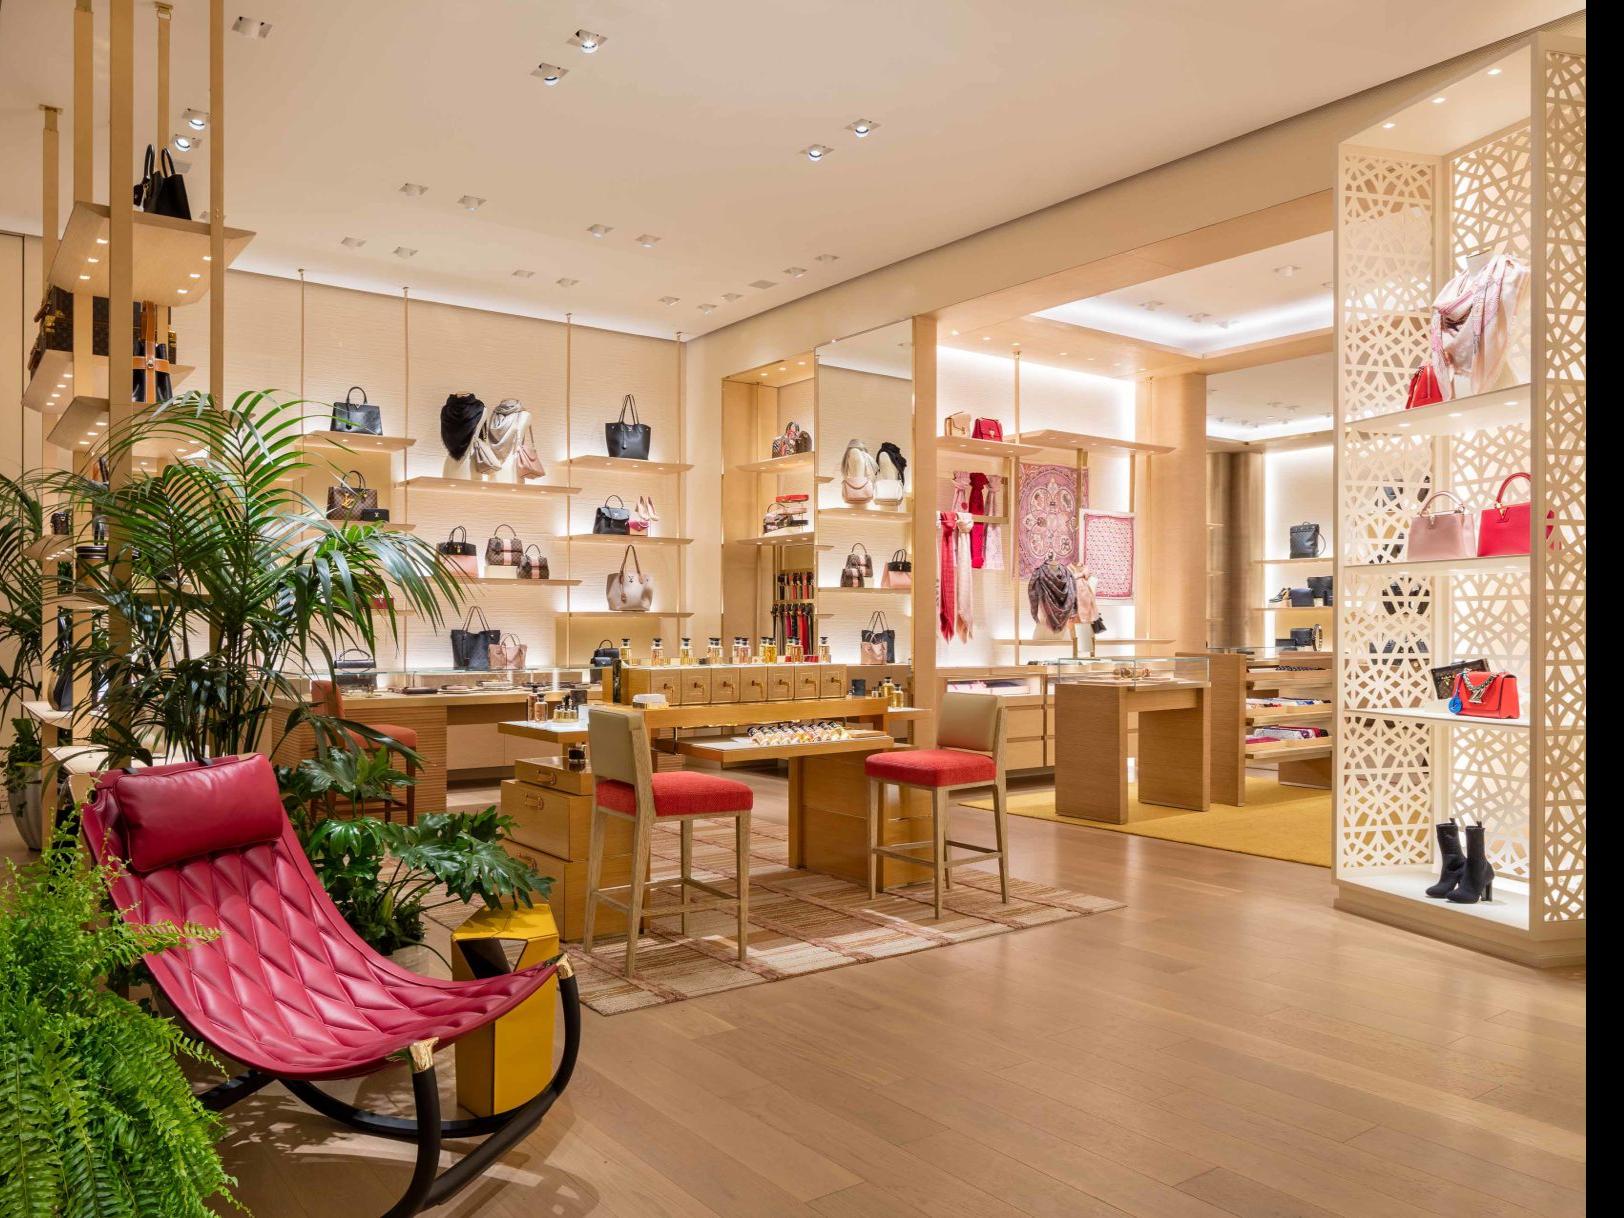 Louis Vuitton opens its doors in Charleston Place, Business